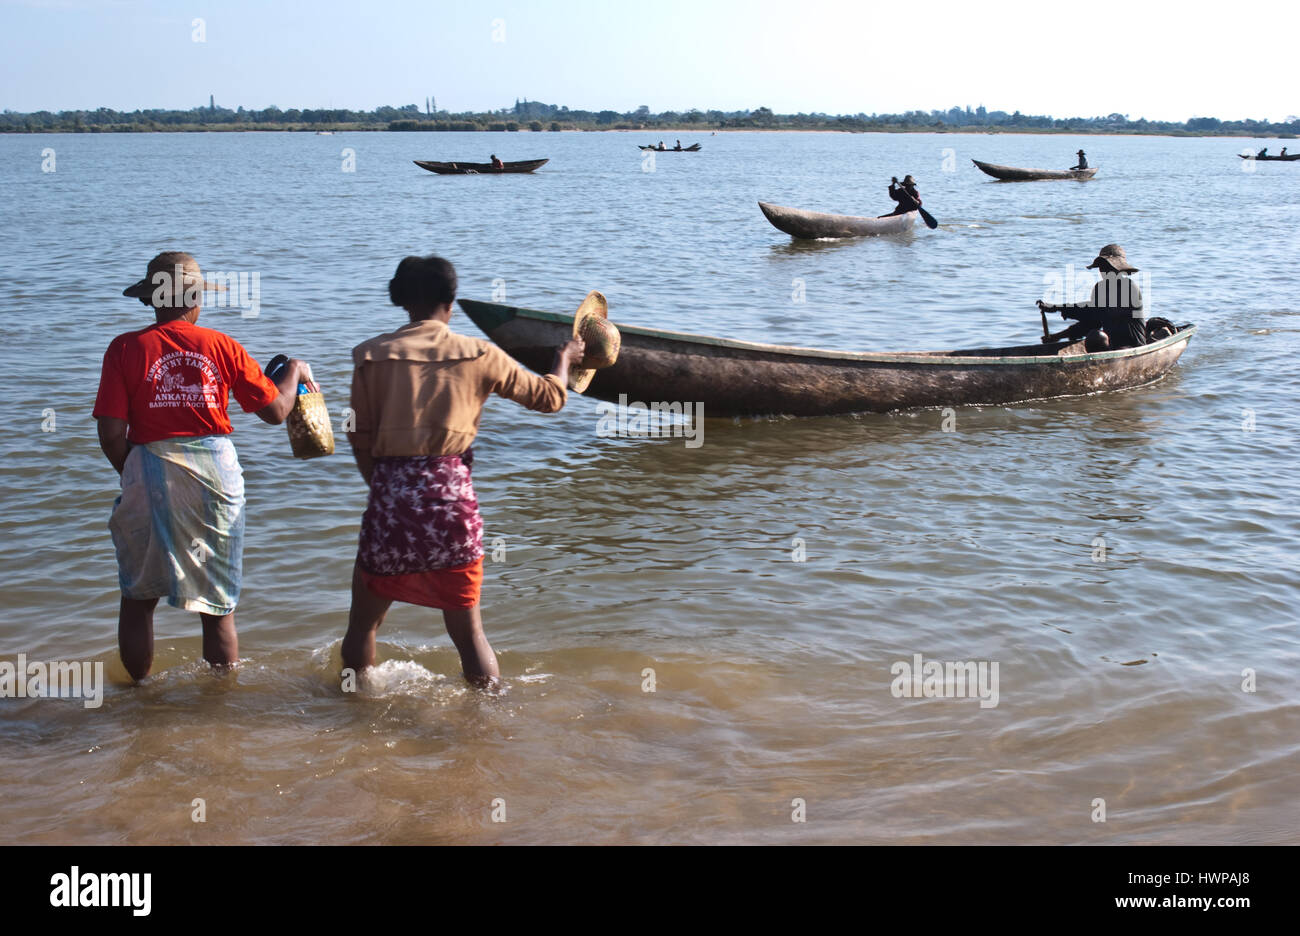 Two women are hailing a taxi boat to cross the lake ( Madagascar) Stock Photo